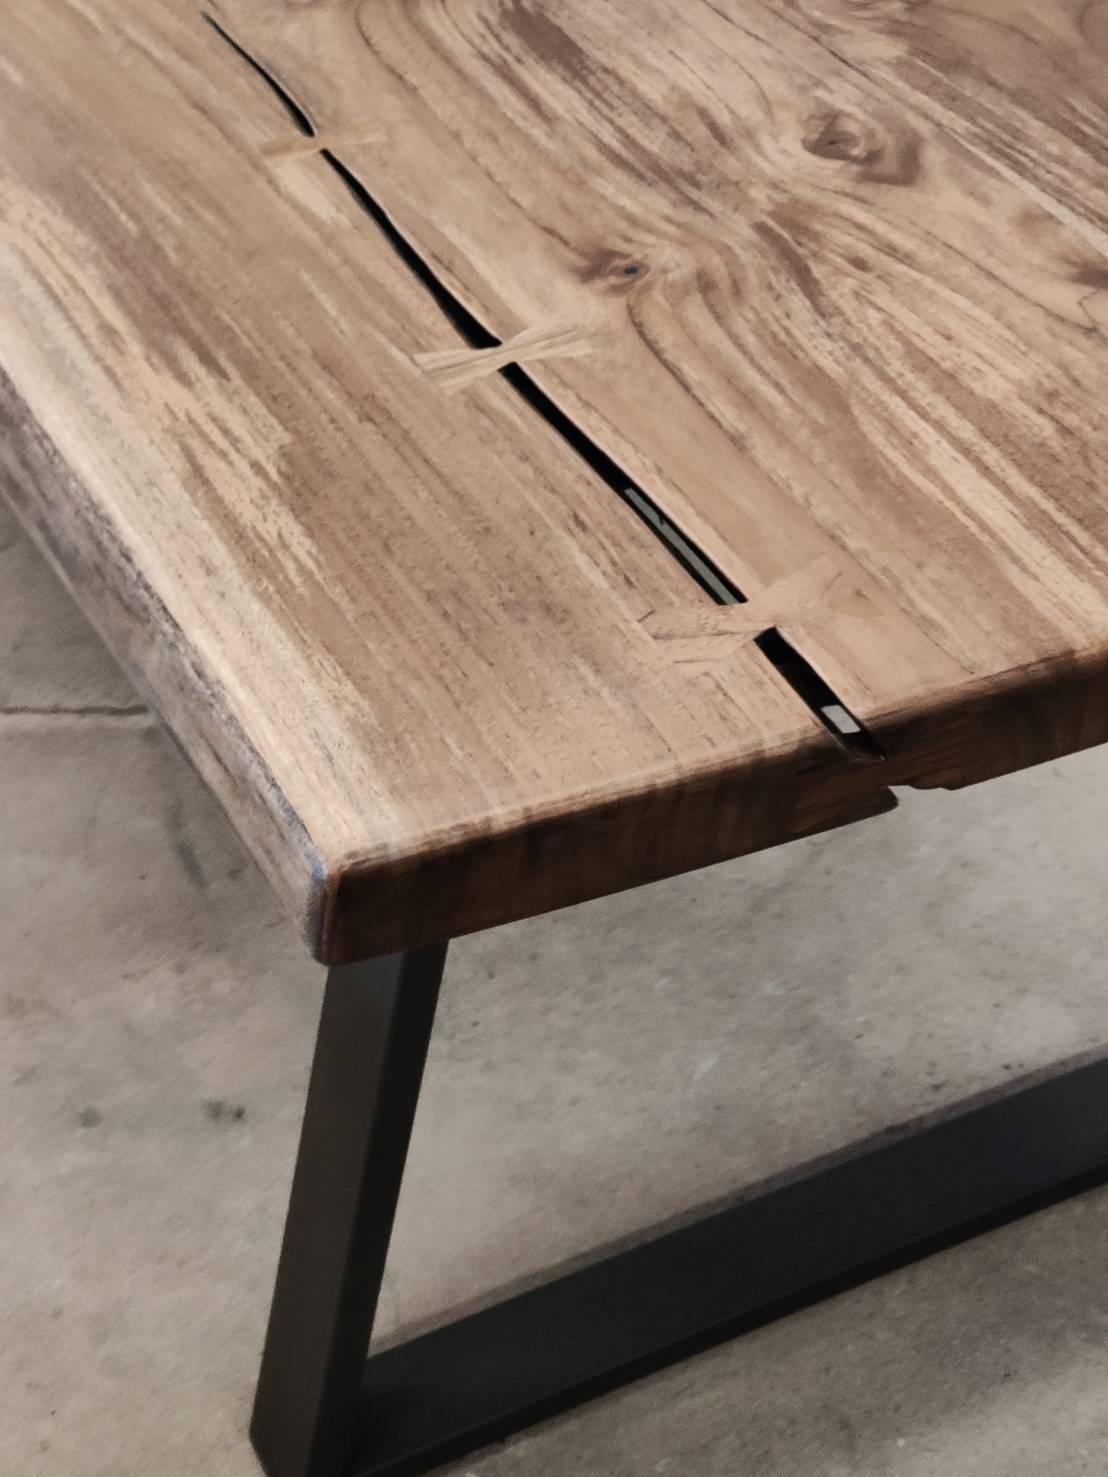 A one-of-a-kind, build-to-order masterpiece. This table is 76